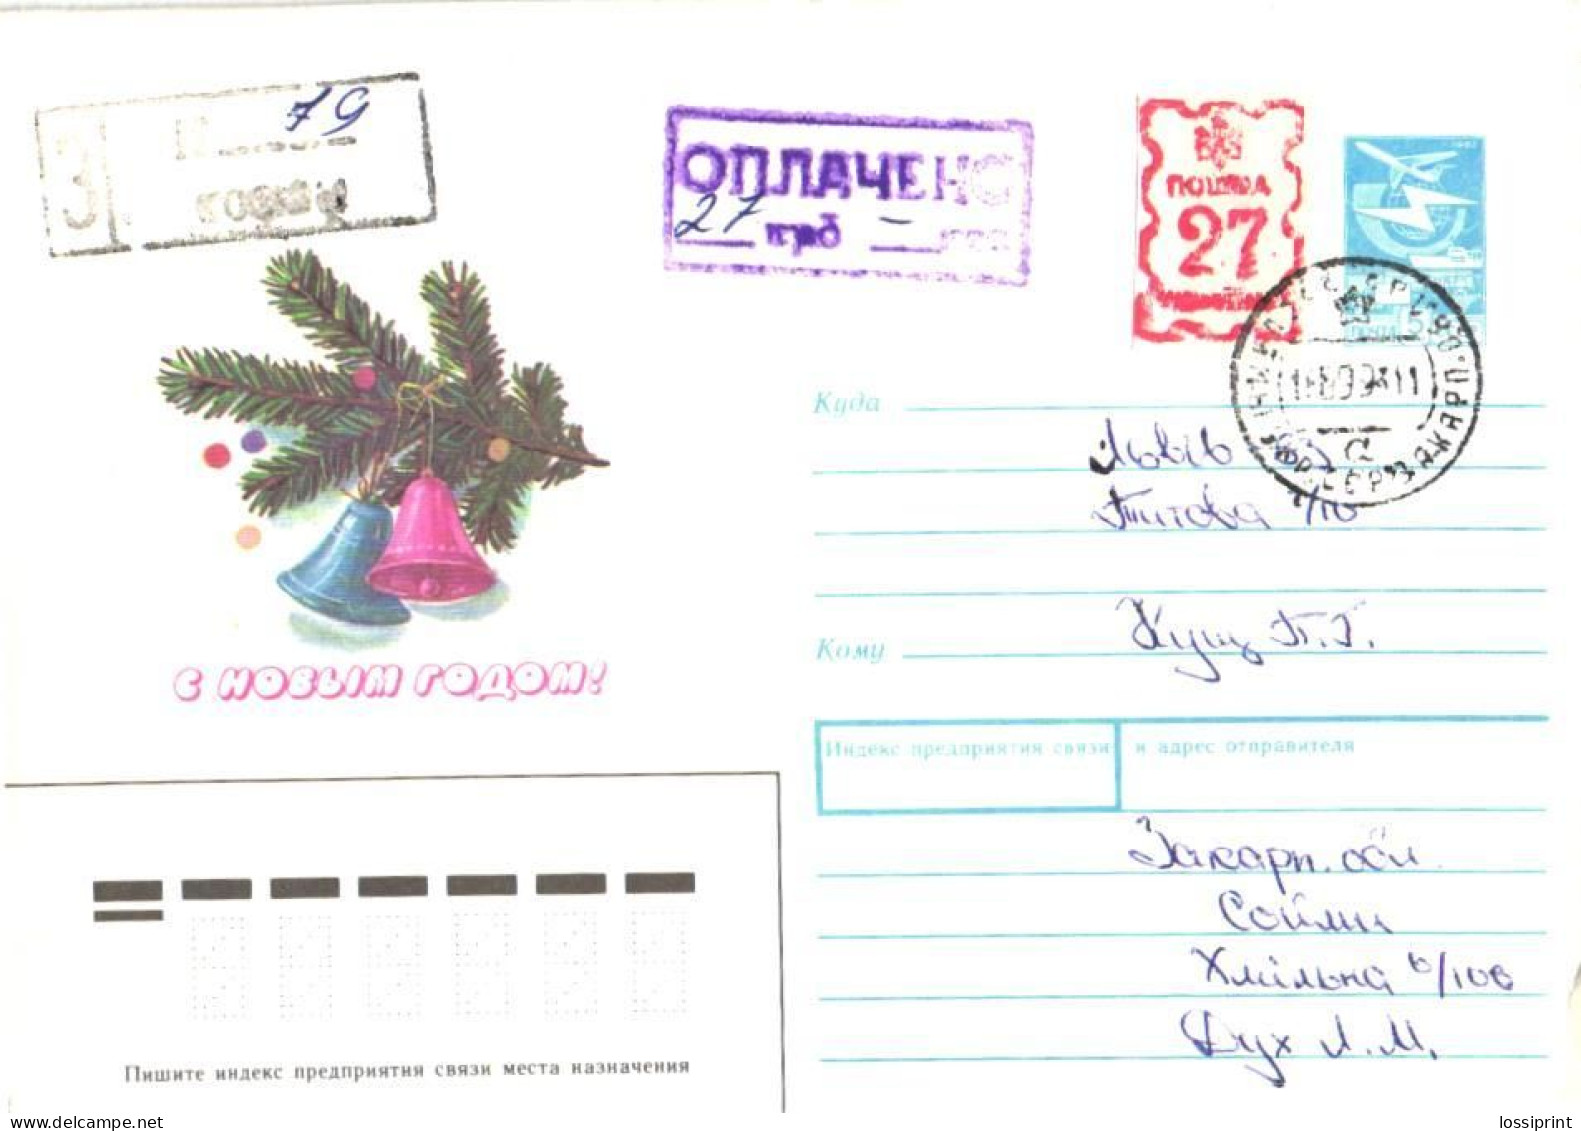 Ukraine:Ukraina:Registered Letter From Kofor With Stamp And Surcharge Cancellation, 1993 - Ucrania